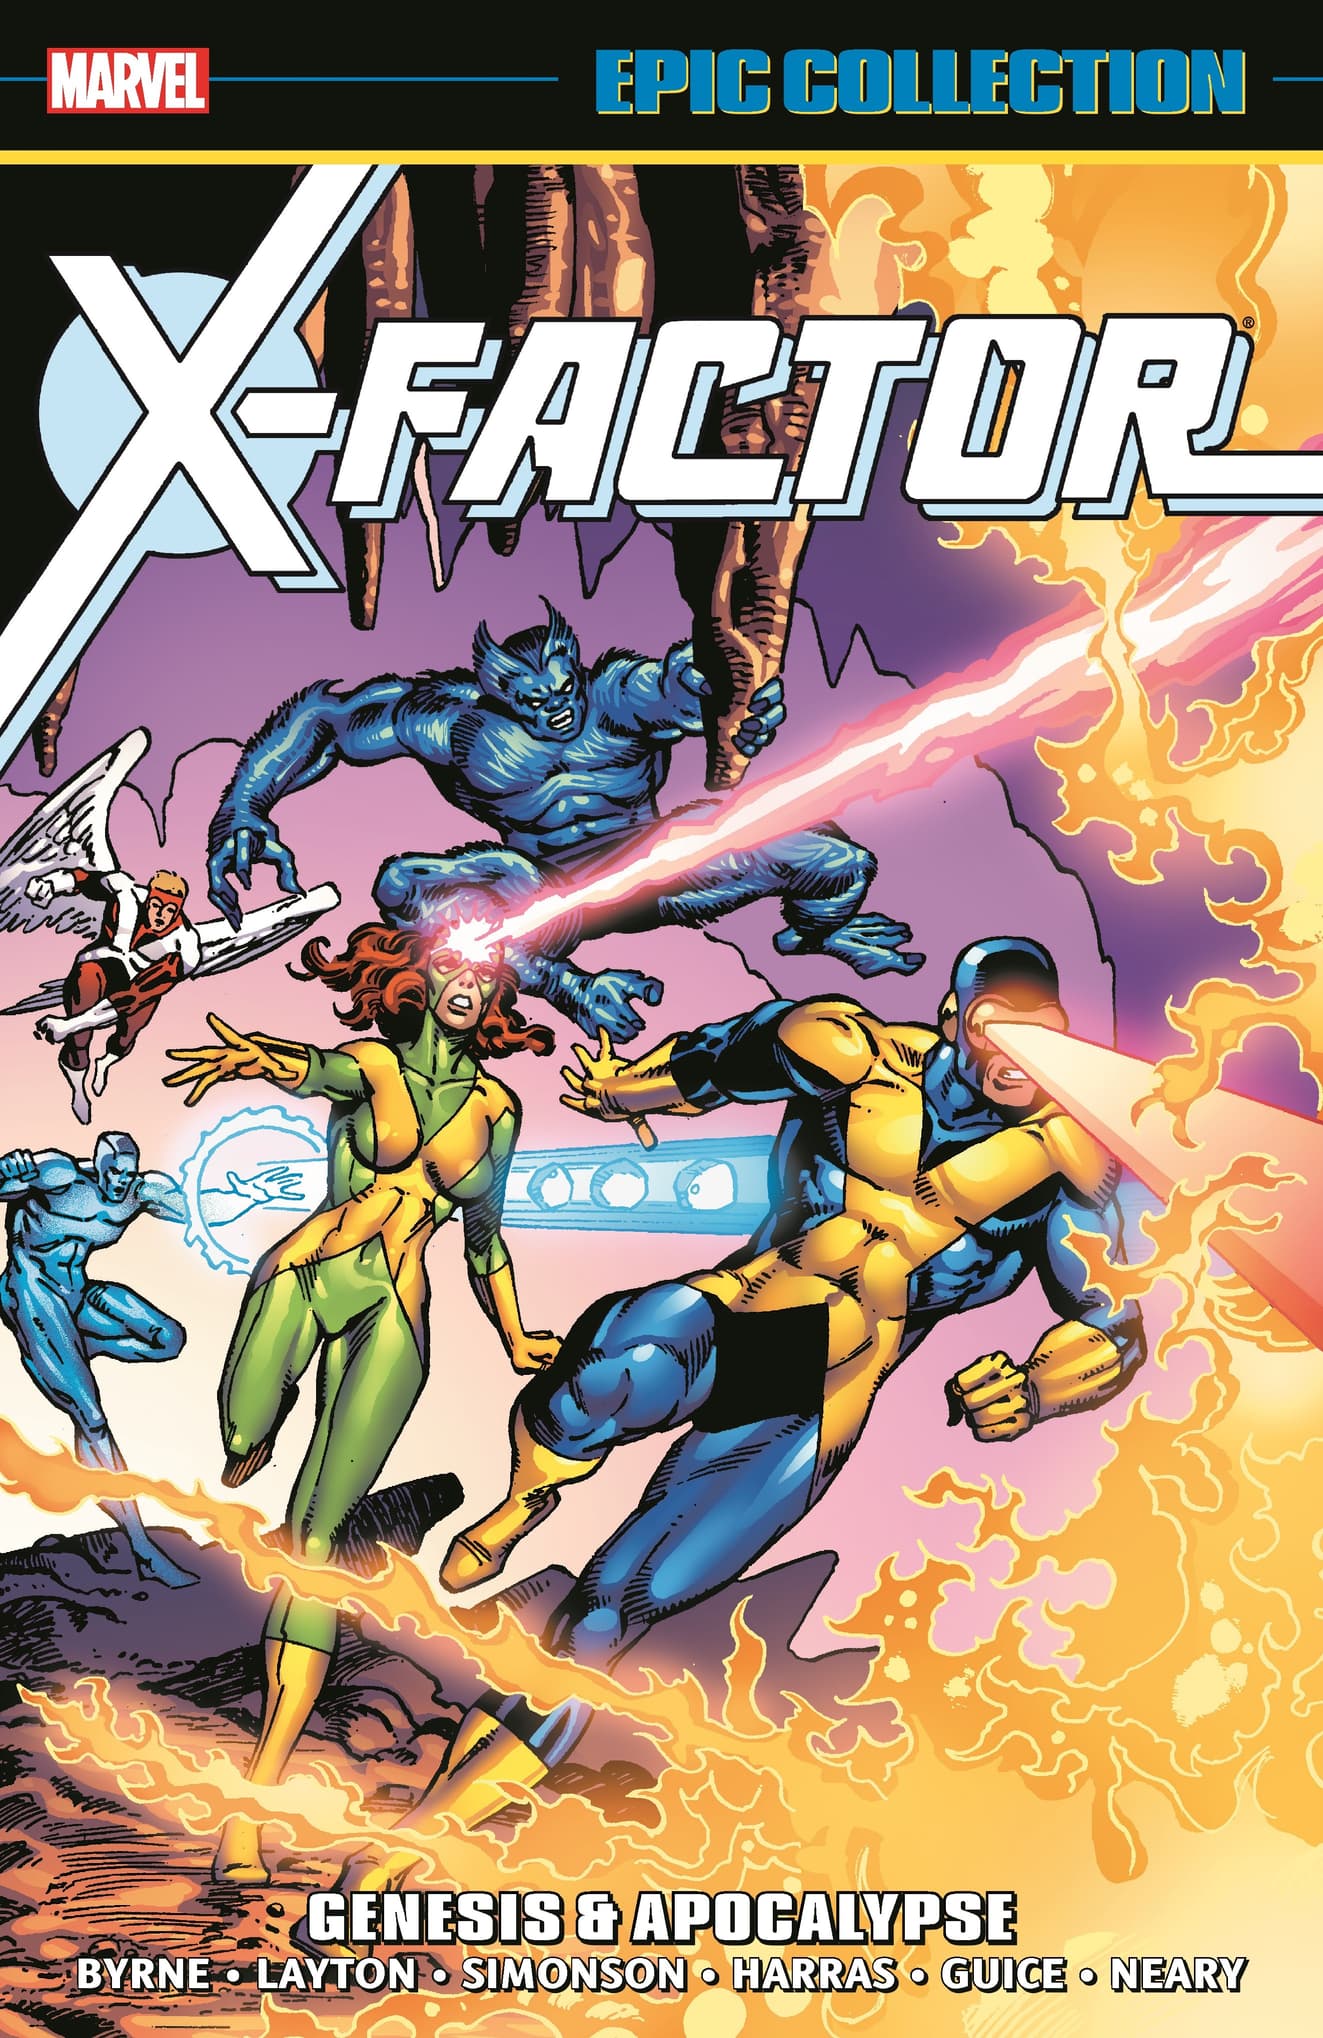 Cover to X-Factor Epic Collection: Genesis & Apocalypse (Trade Paperback).